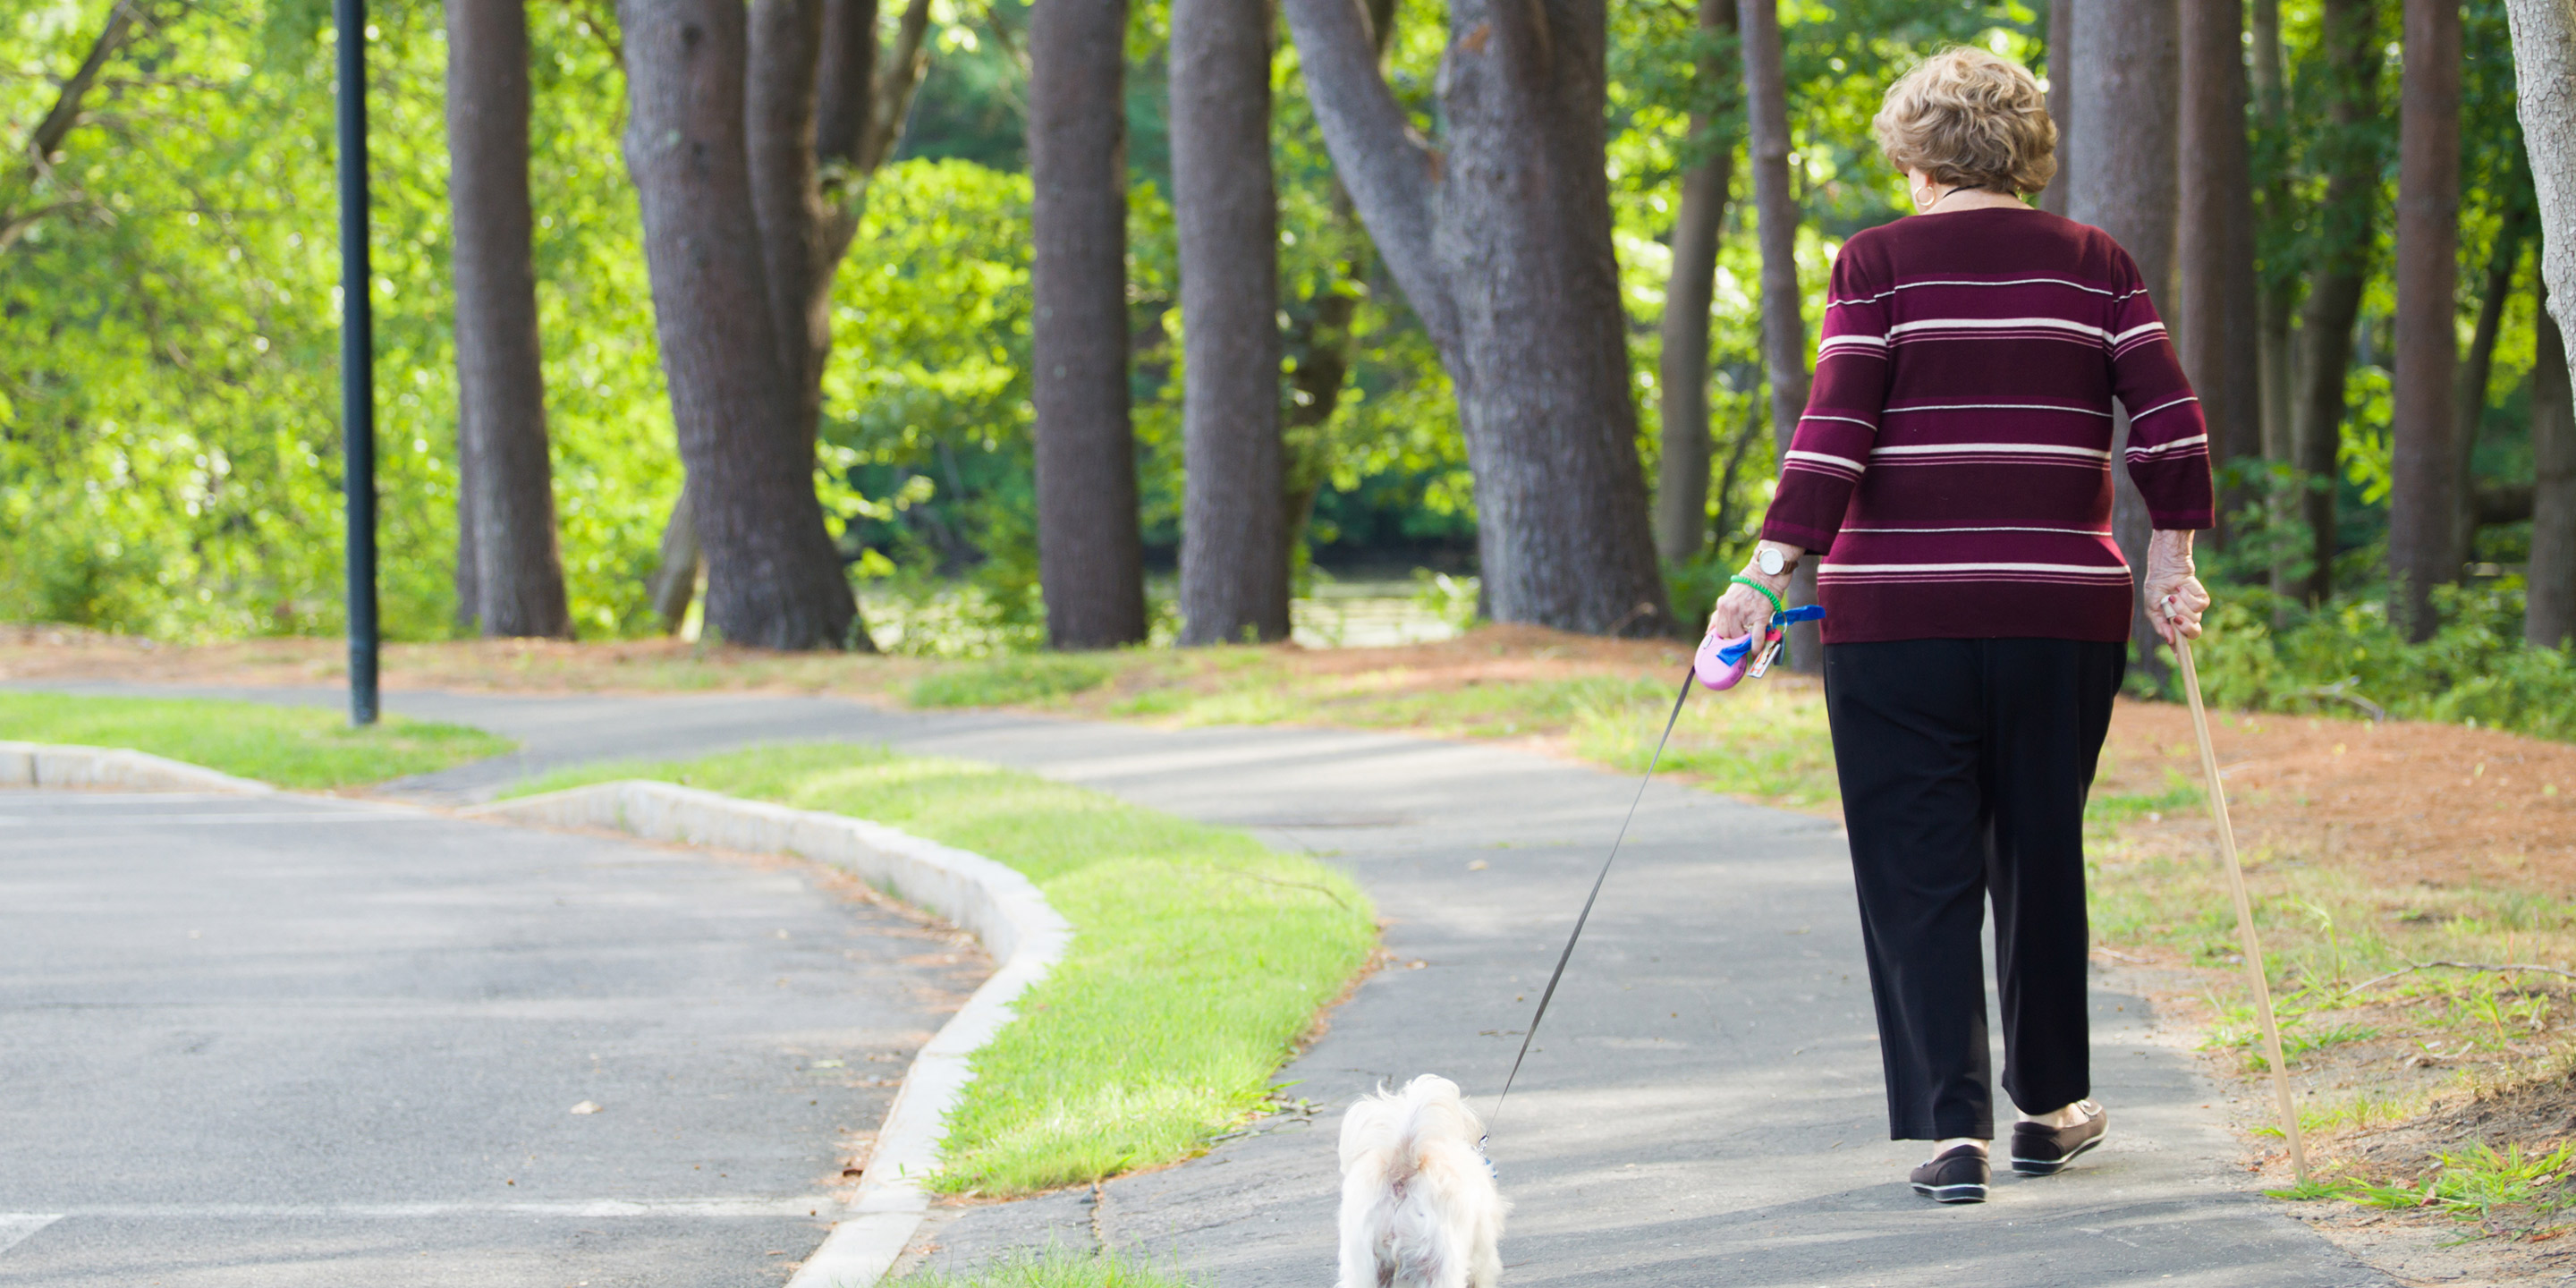 A woman walks down a path holding a dog leash in one hand and a walking stick in the other.